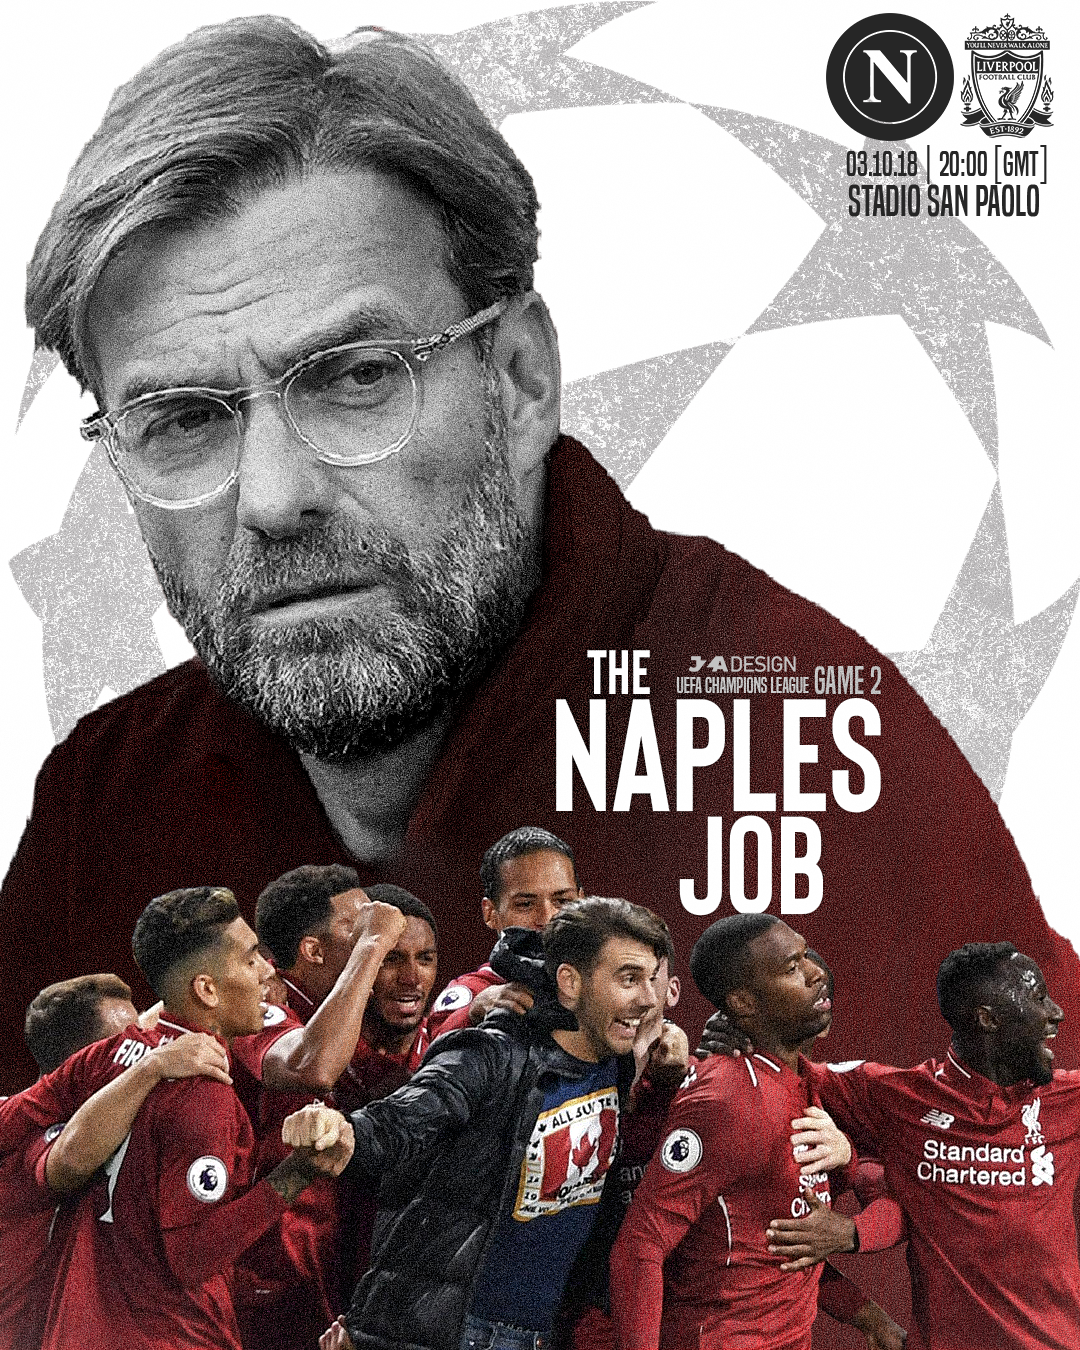 Liverpool FC - 2018/19 Champions League Match Posters on Behance